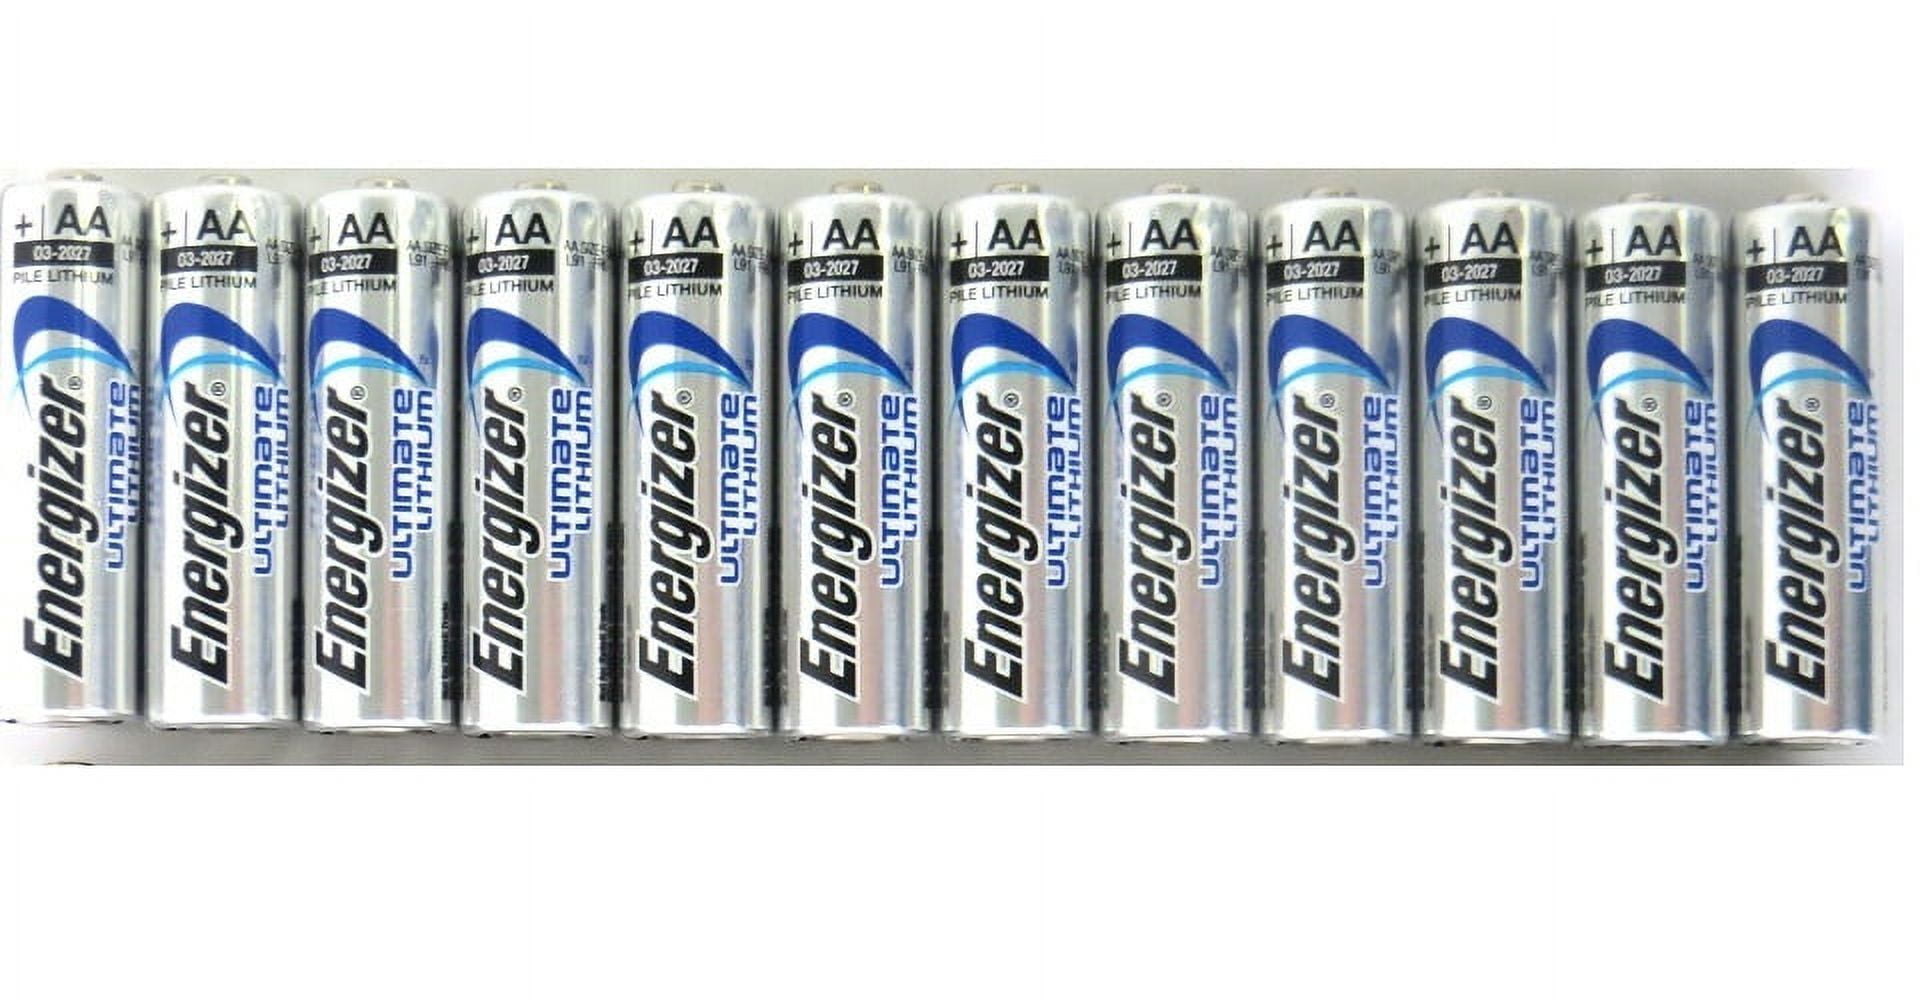 Energizer Ultimate Lithium AA Batteries (8-Pack), 1.5V Lithium